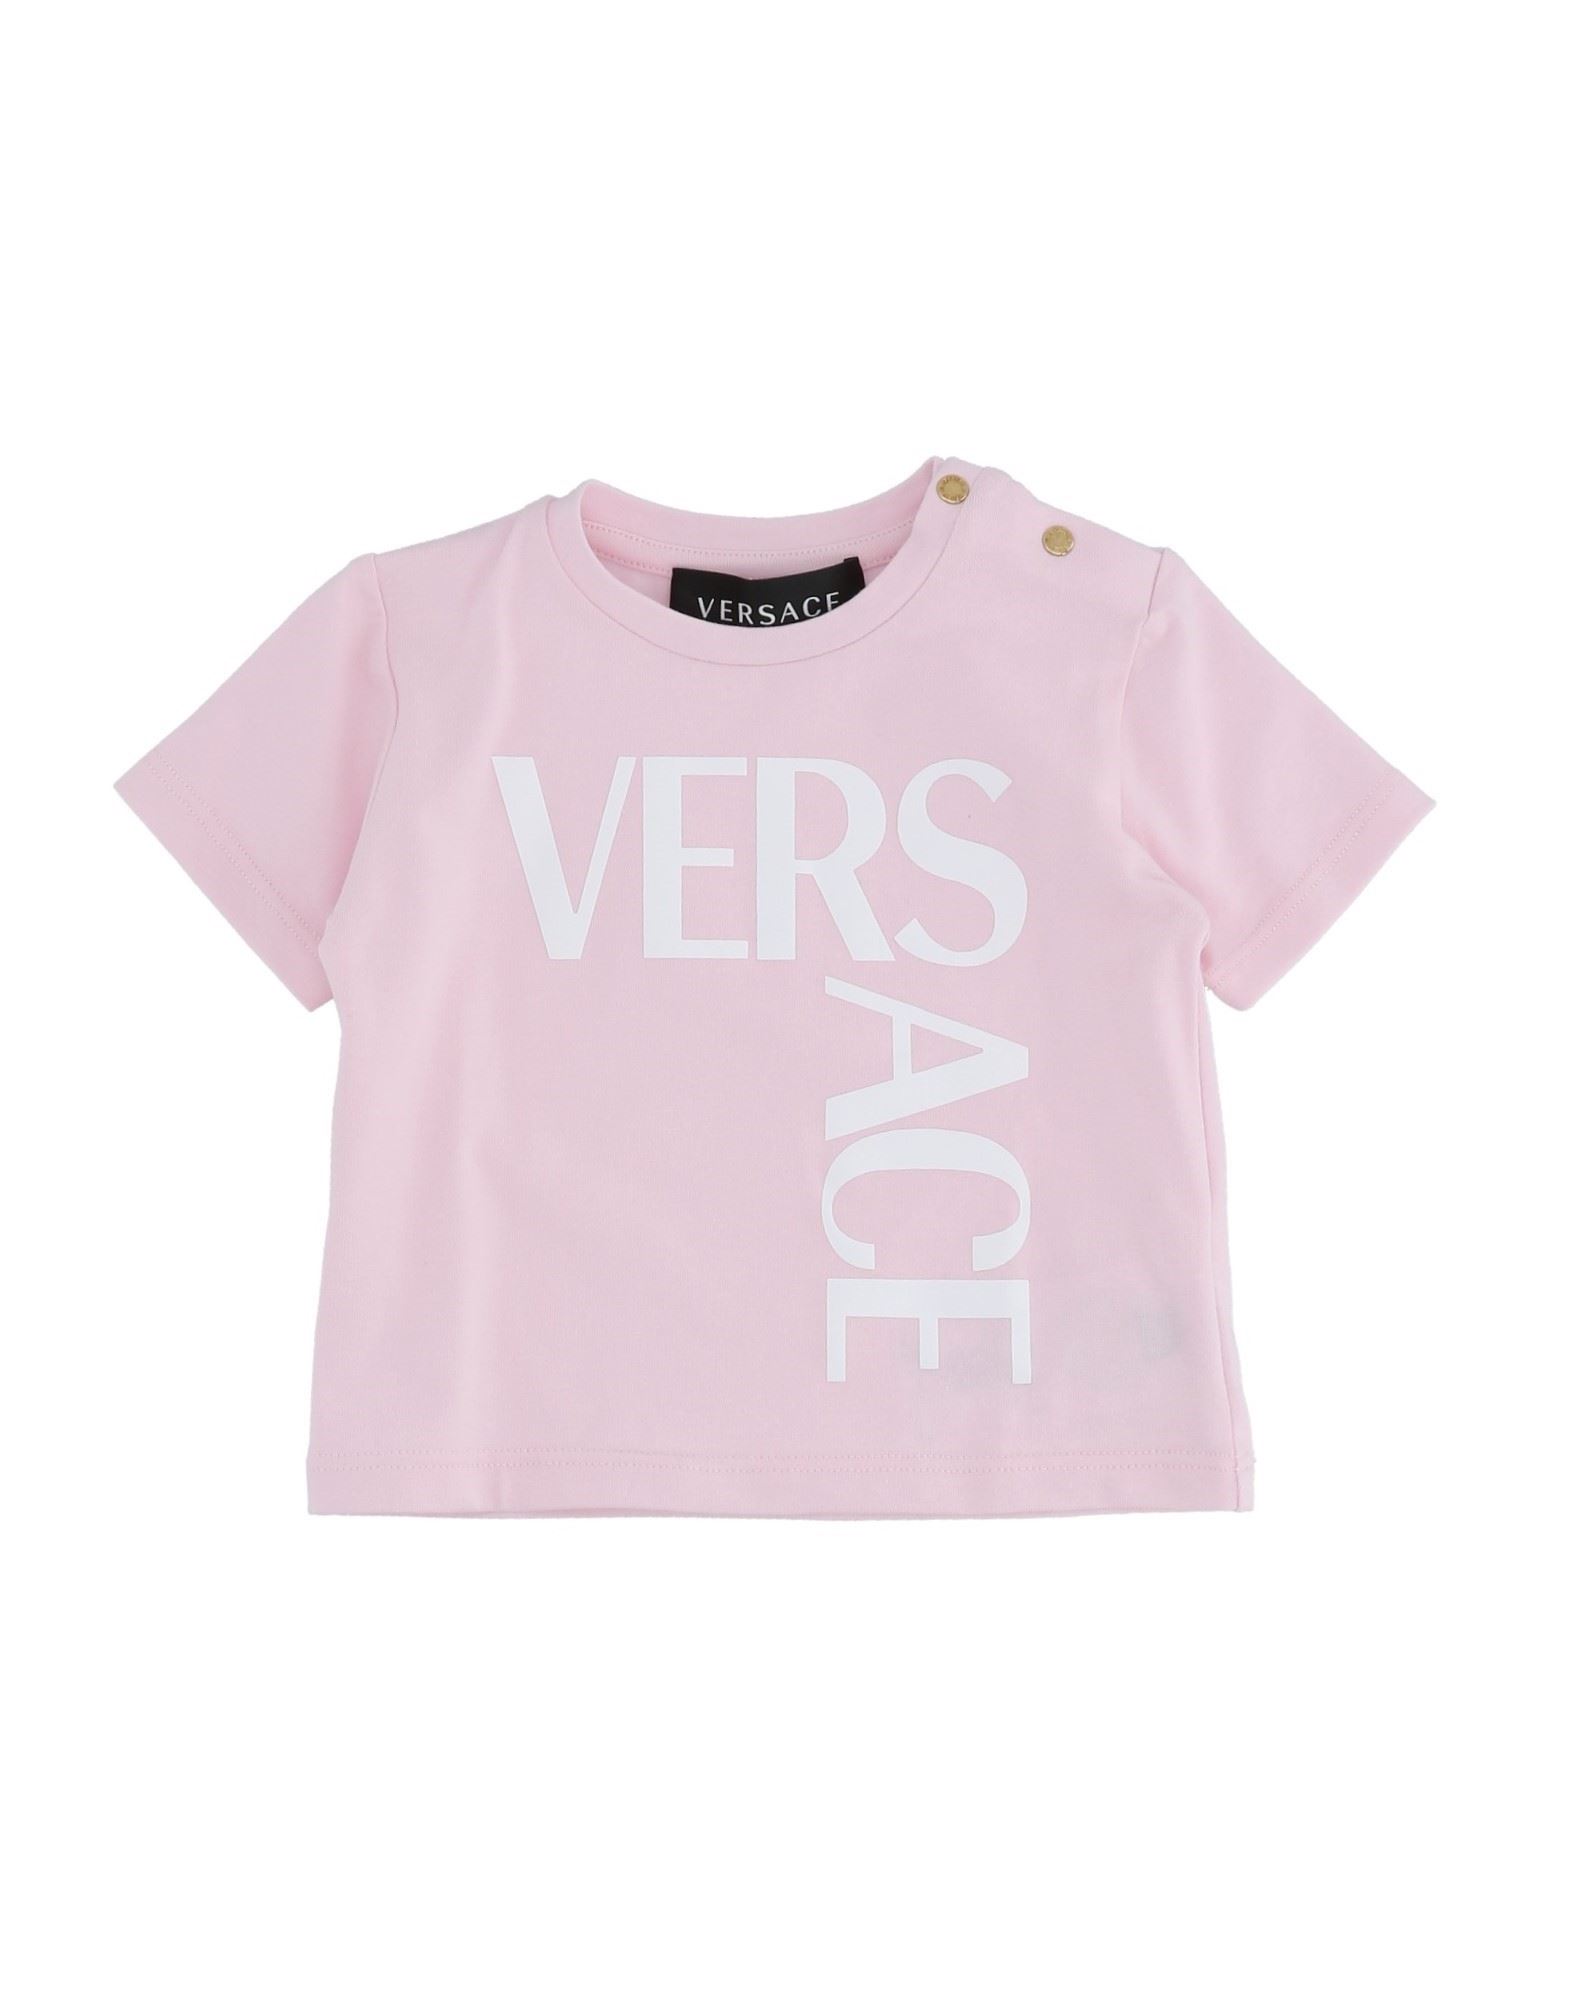 VERSACE YOUNG T-shirts Kinder Hellrosa von VERSACE YOUNG